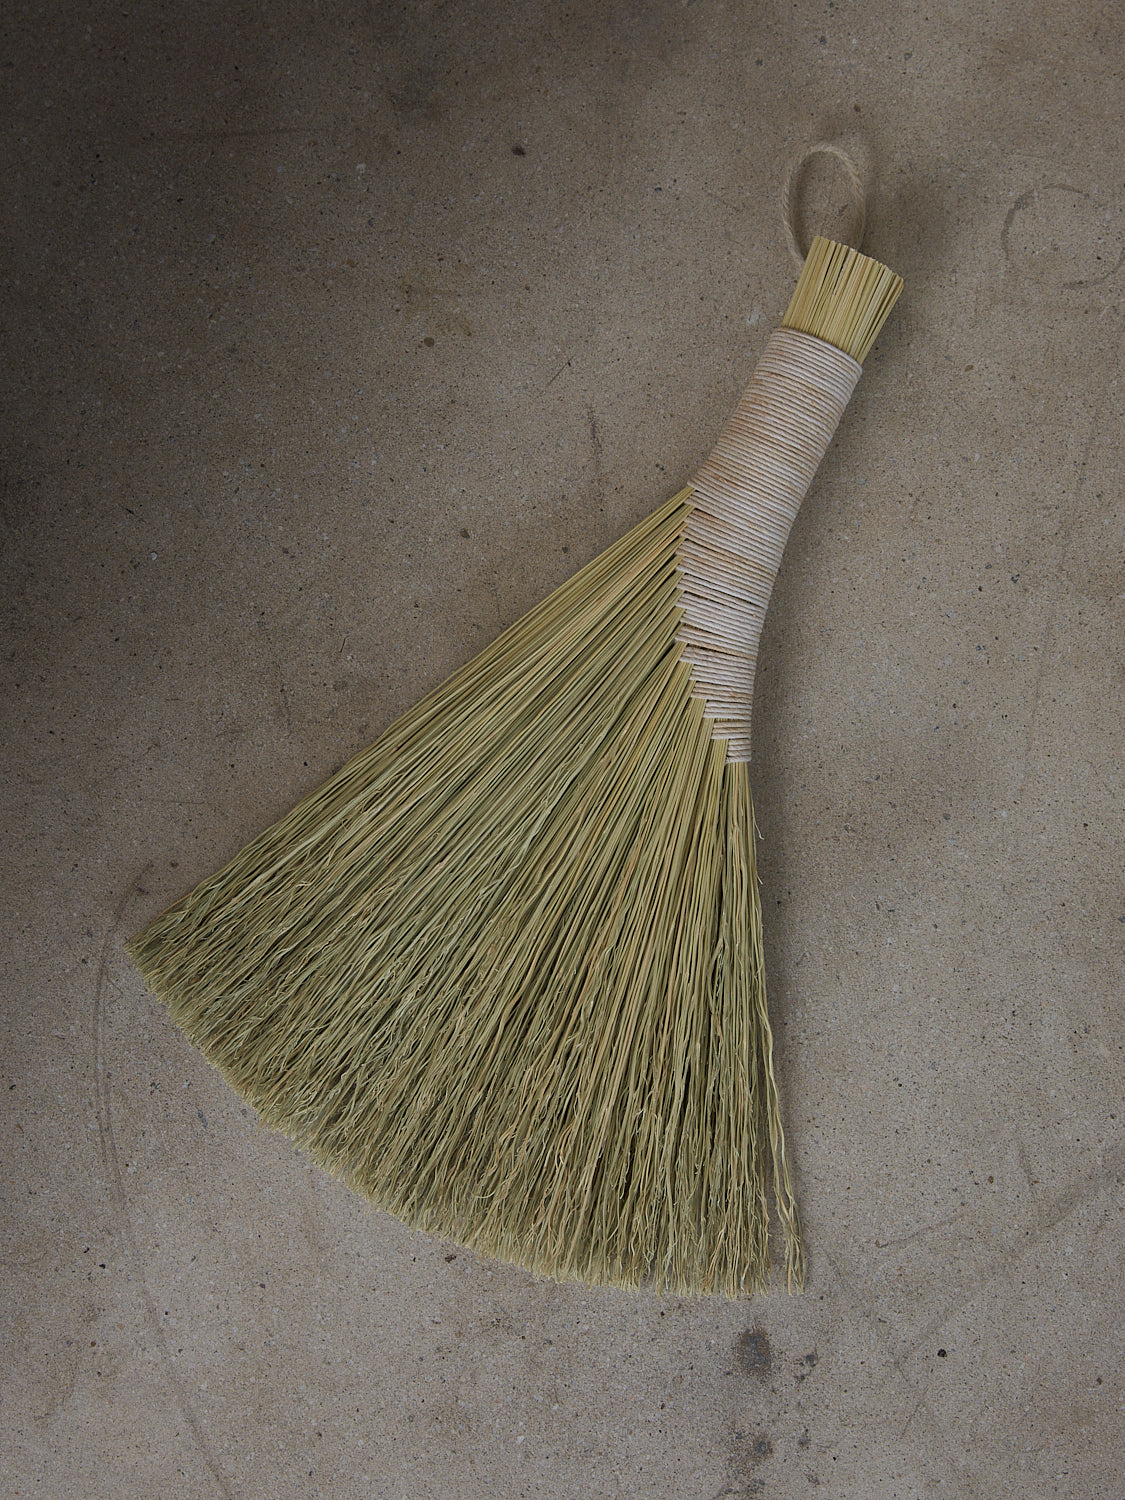 Neutral, rustic handwoven broom made from Sorghum and hemp cording in a classic Appalachian style.